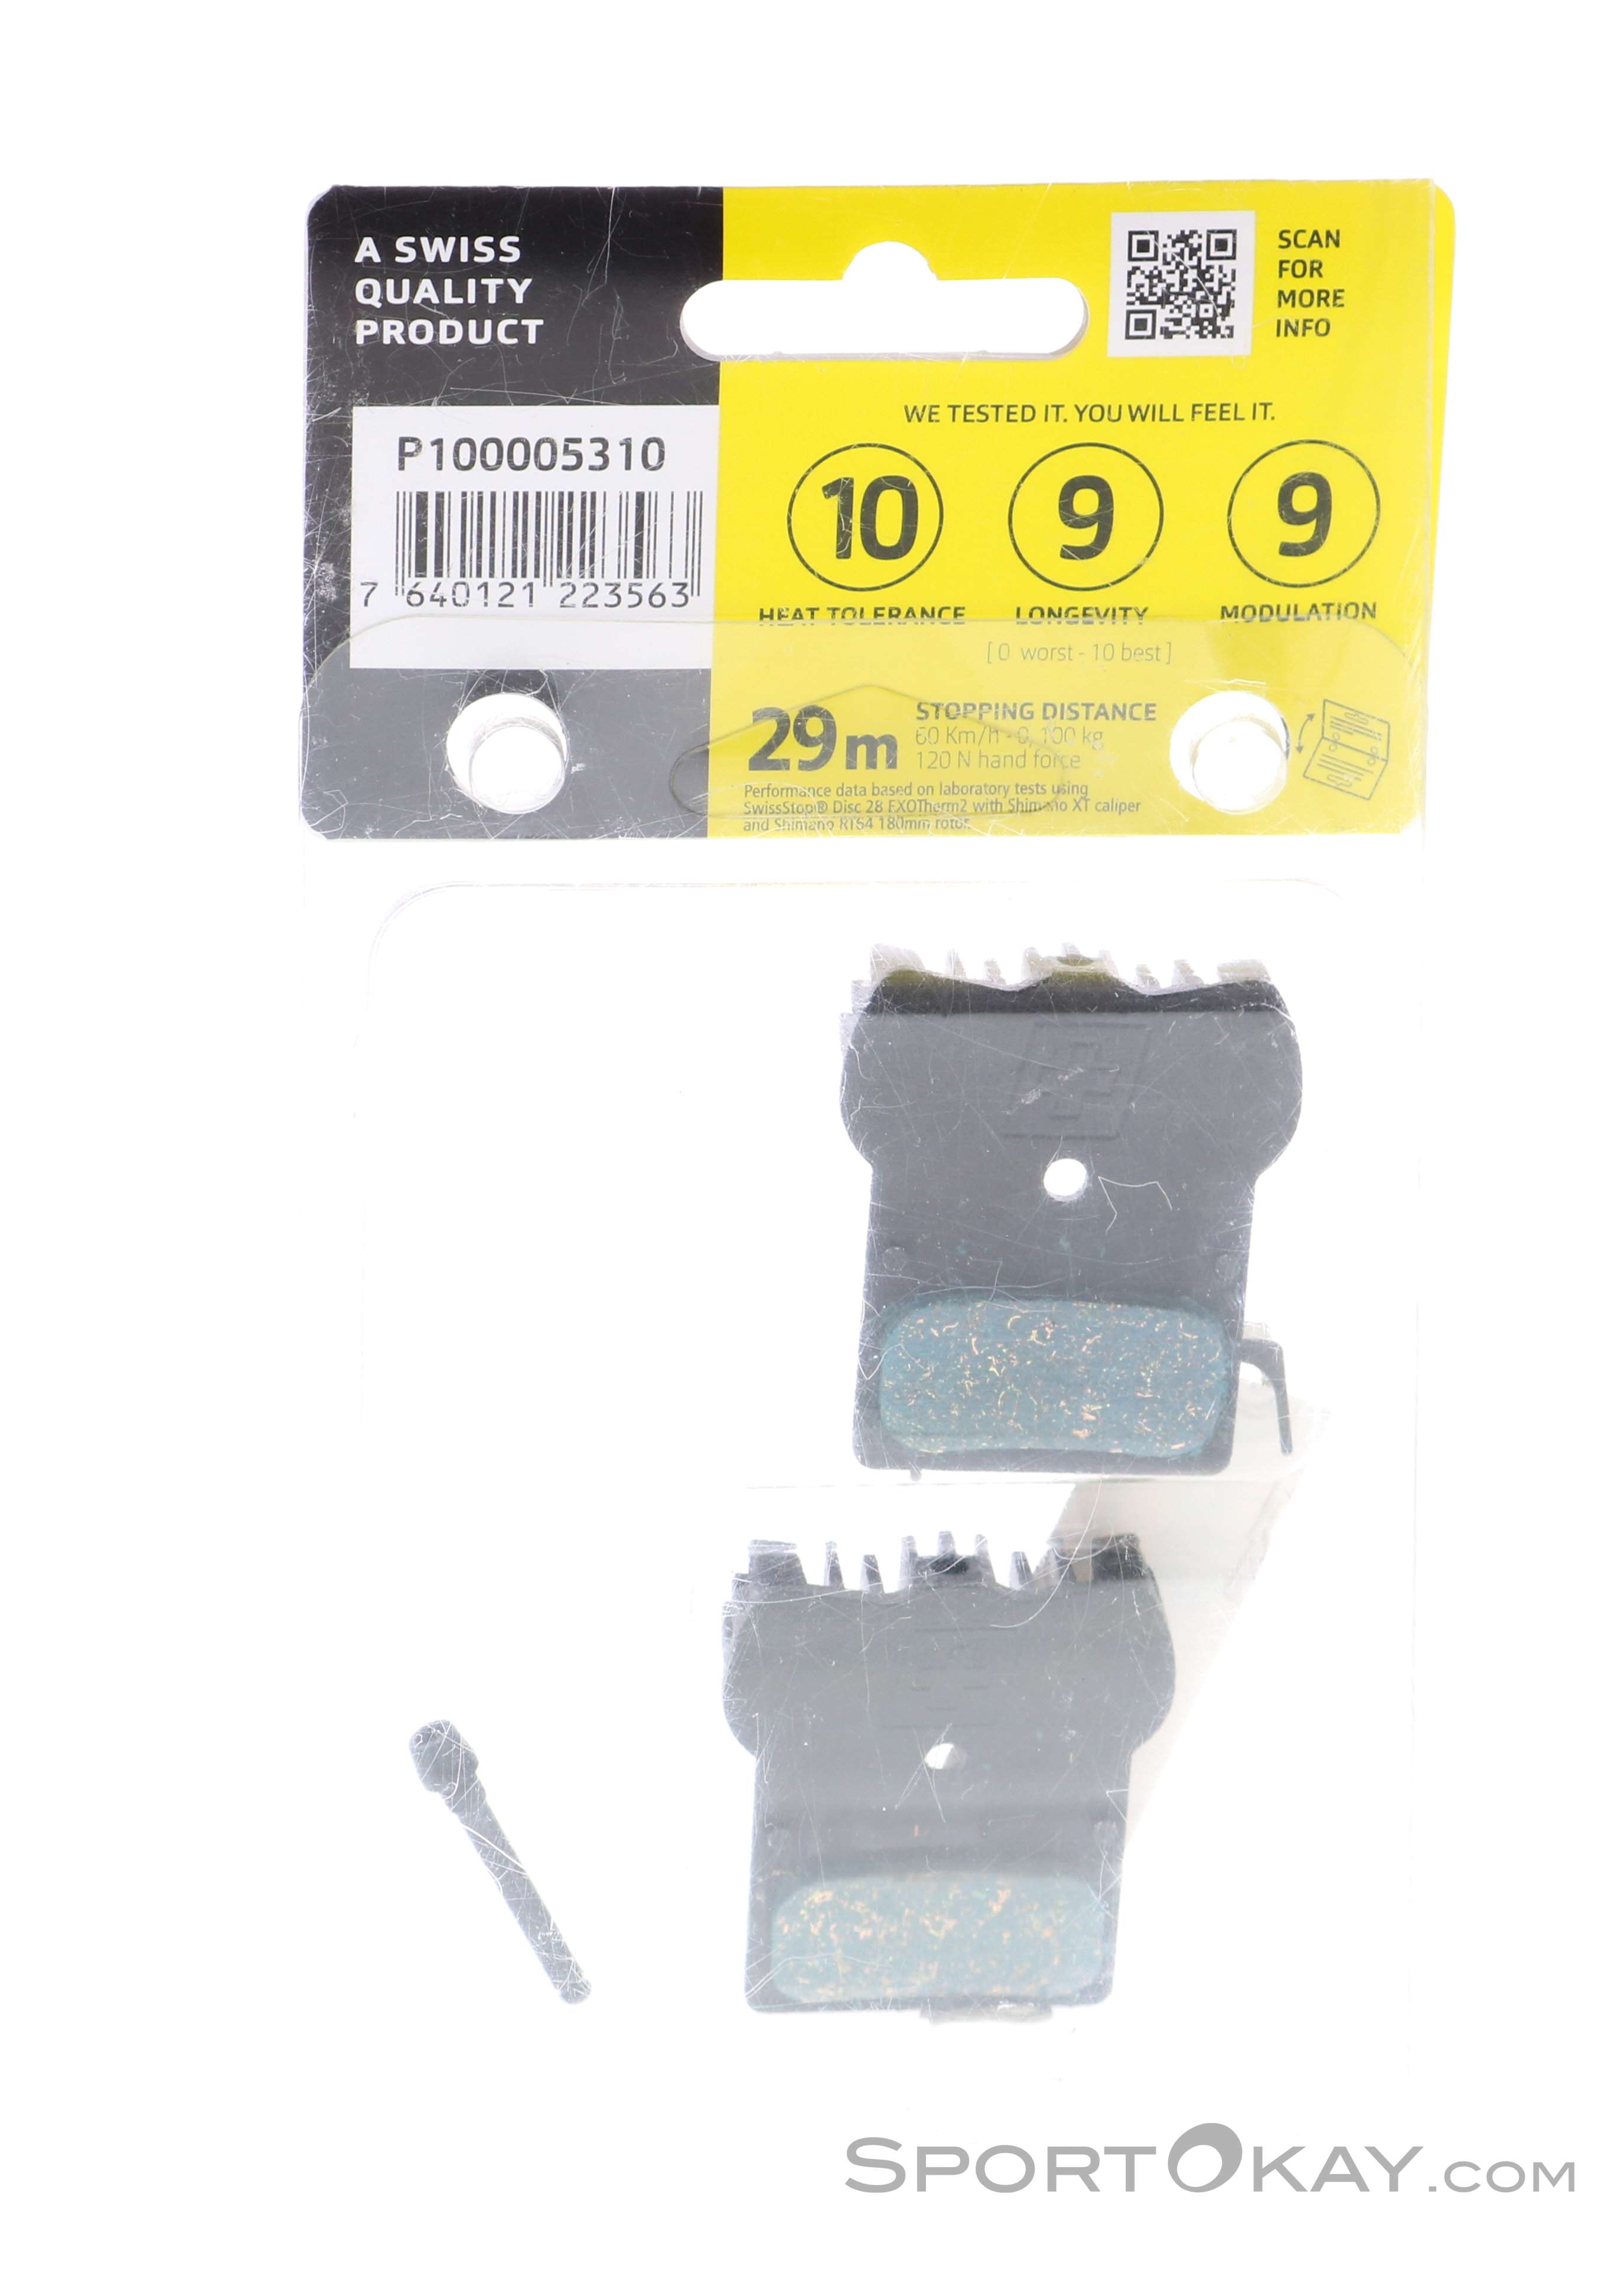 SwissStop Unisexs Exotherm 2 Disc Pads One Size Black 